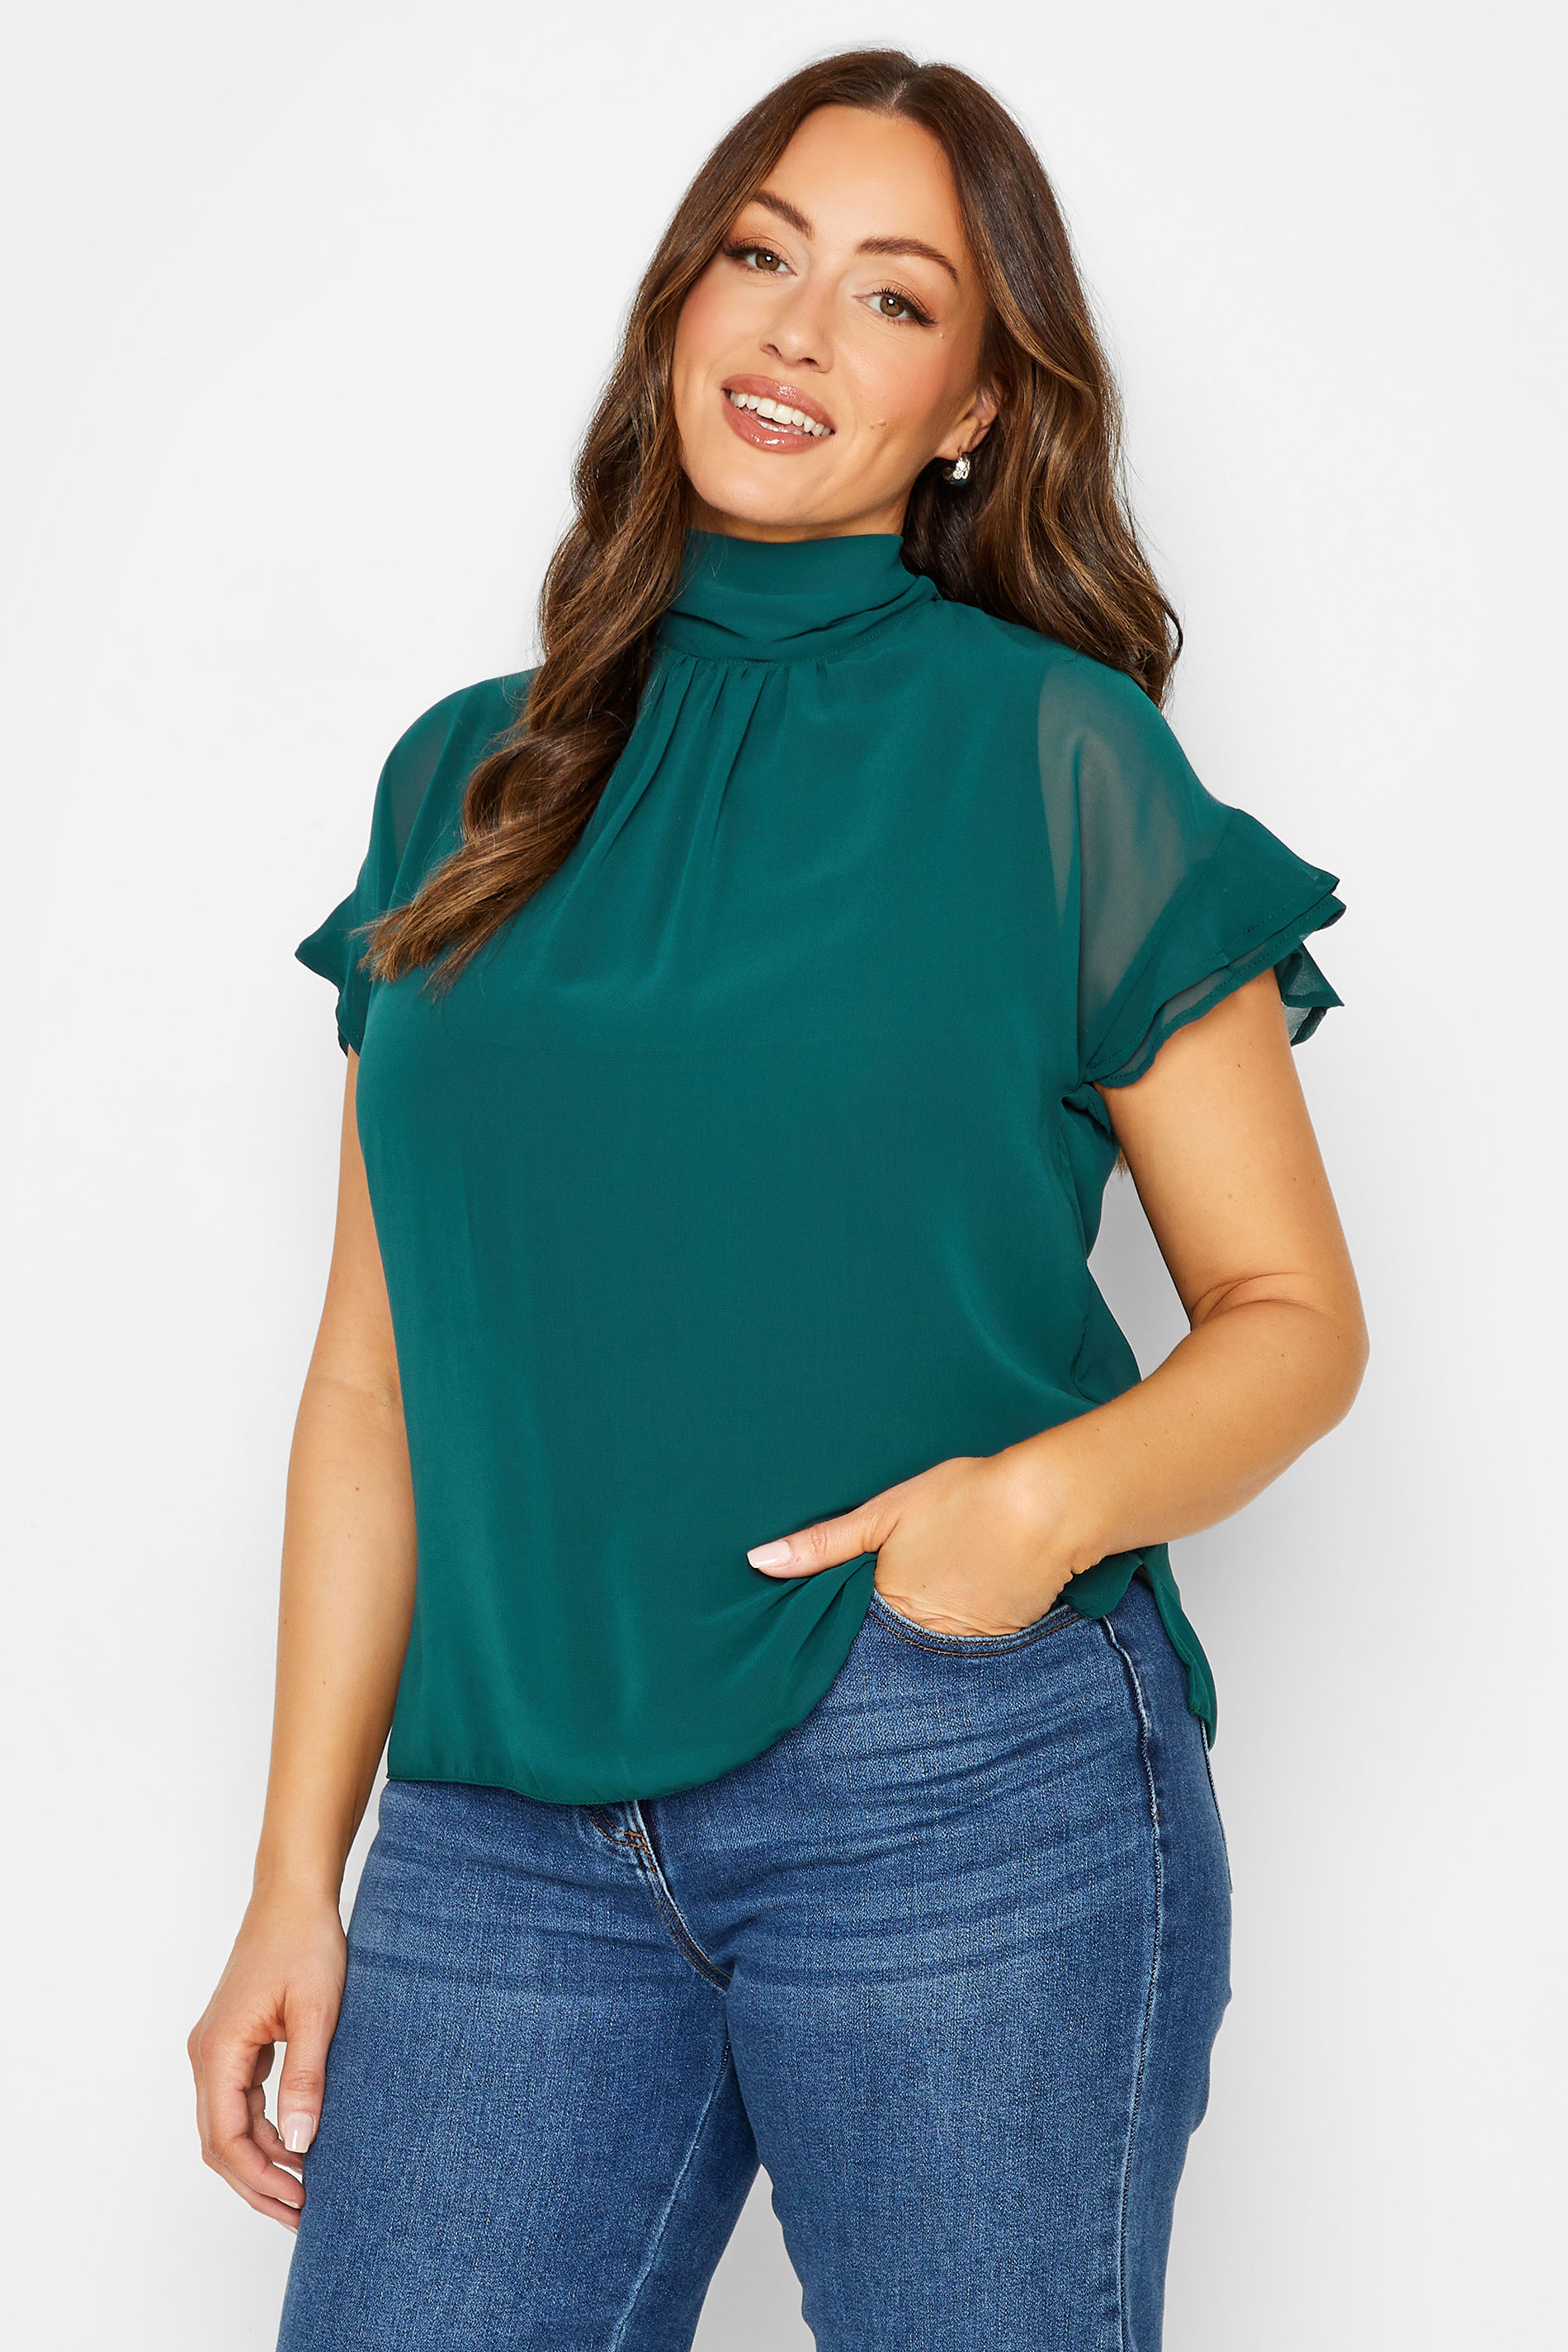 M&Co Green High Neck Frill Sleeve Blouse | M&Co 1